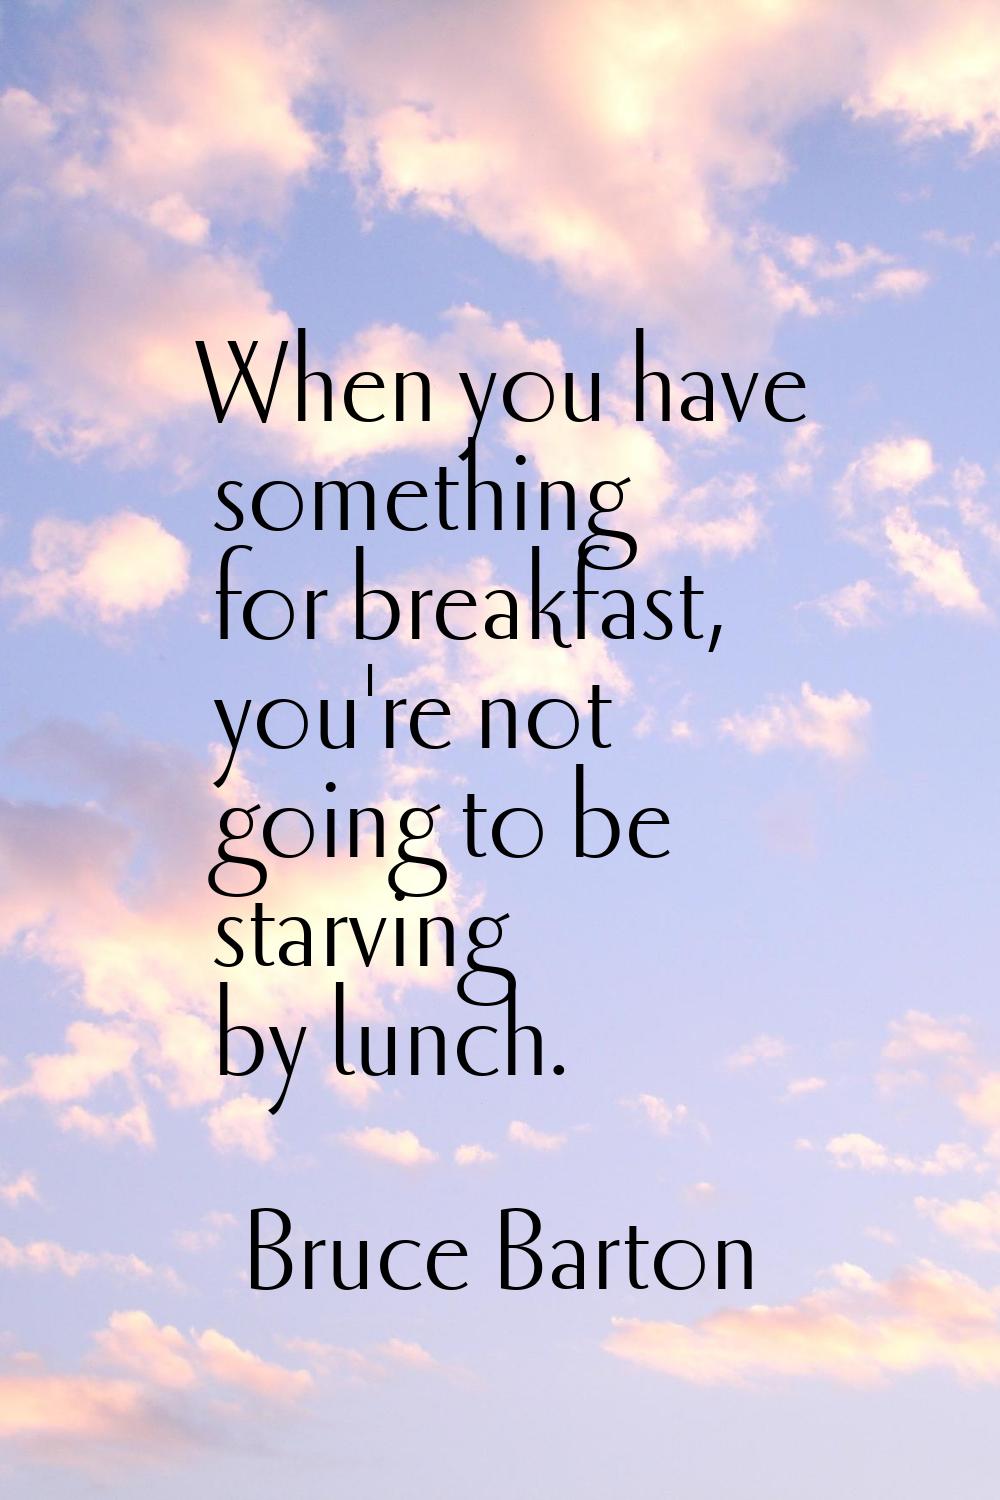 When you have something for breakfast, you're not going to be starving by lunch.